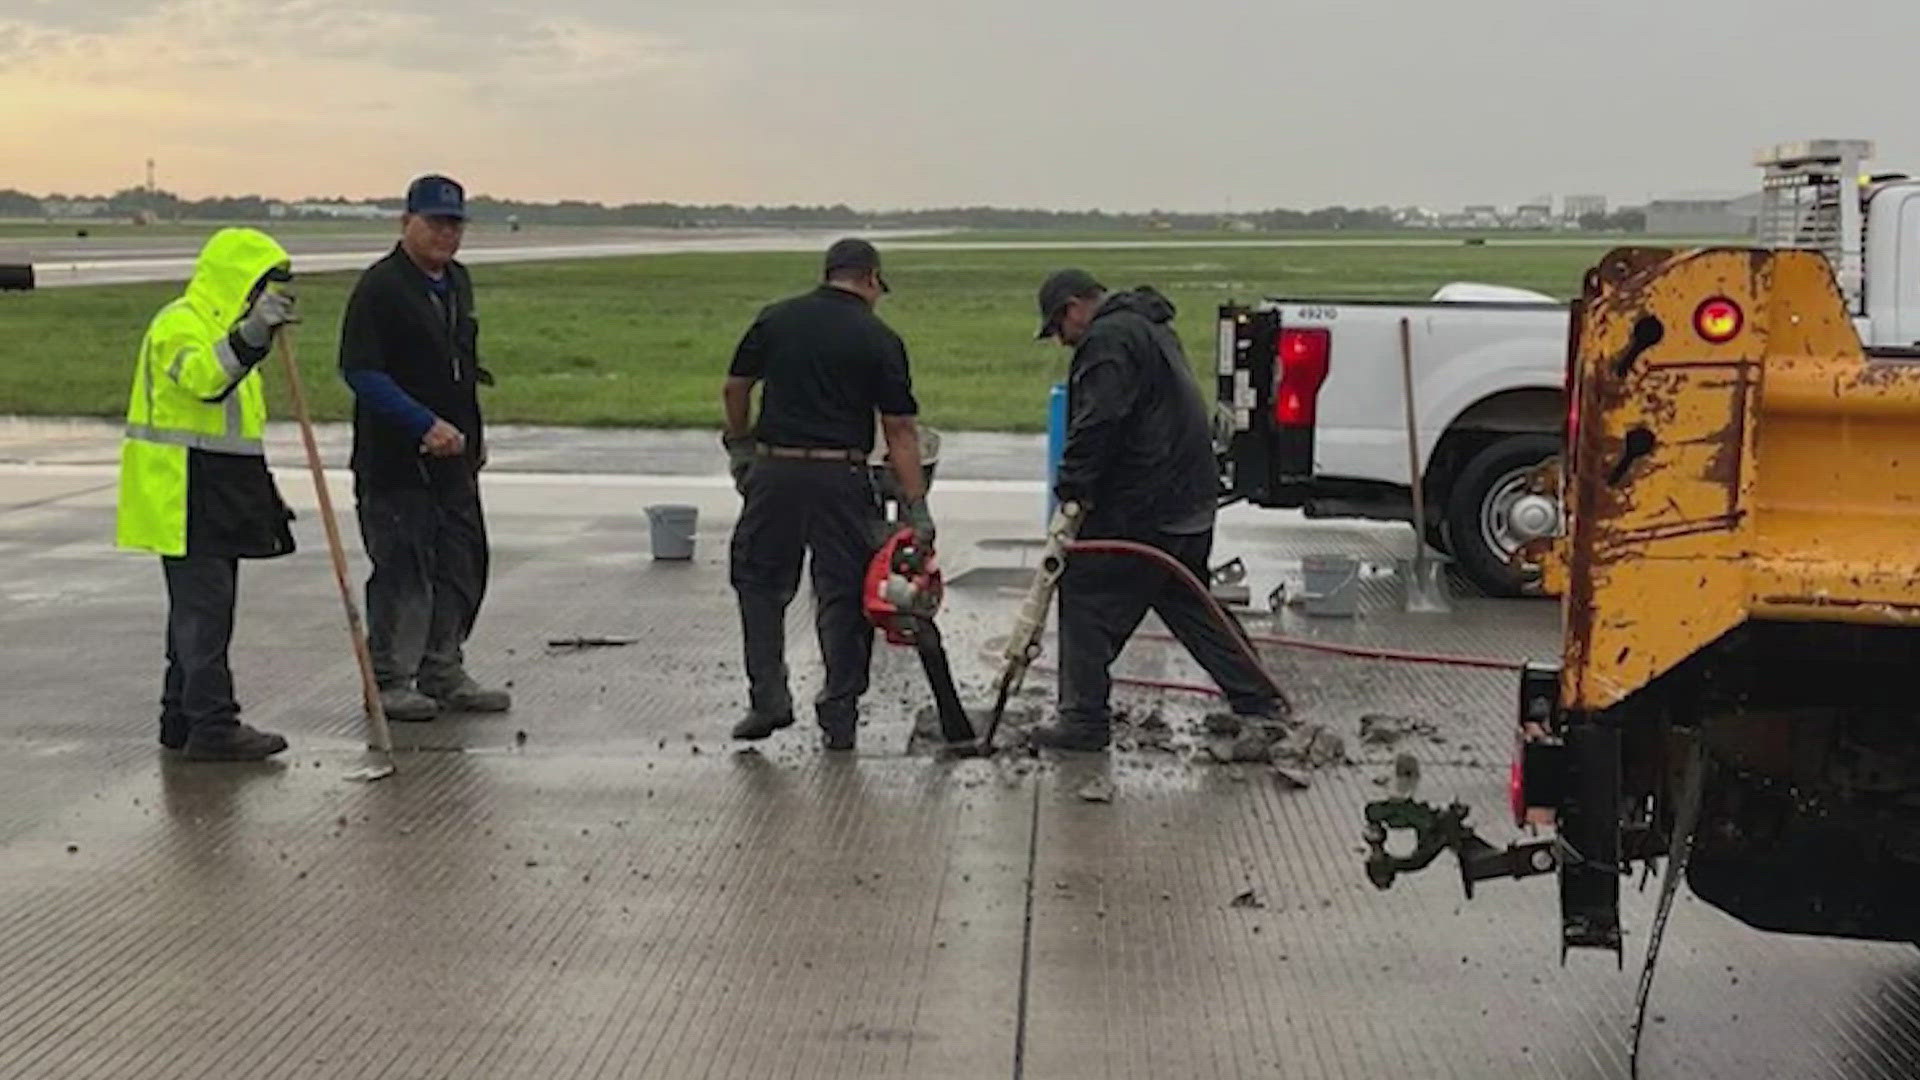 On Monday, a lightning strike led to a ground stop at one of Houston's major airports.